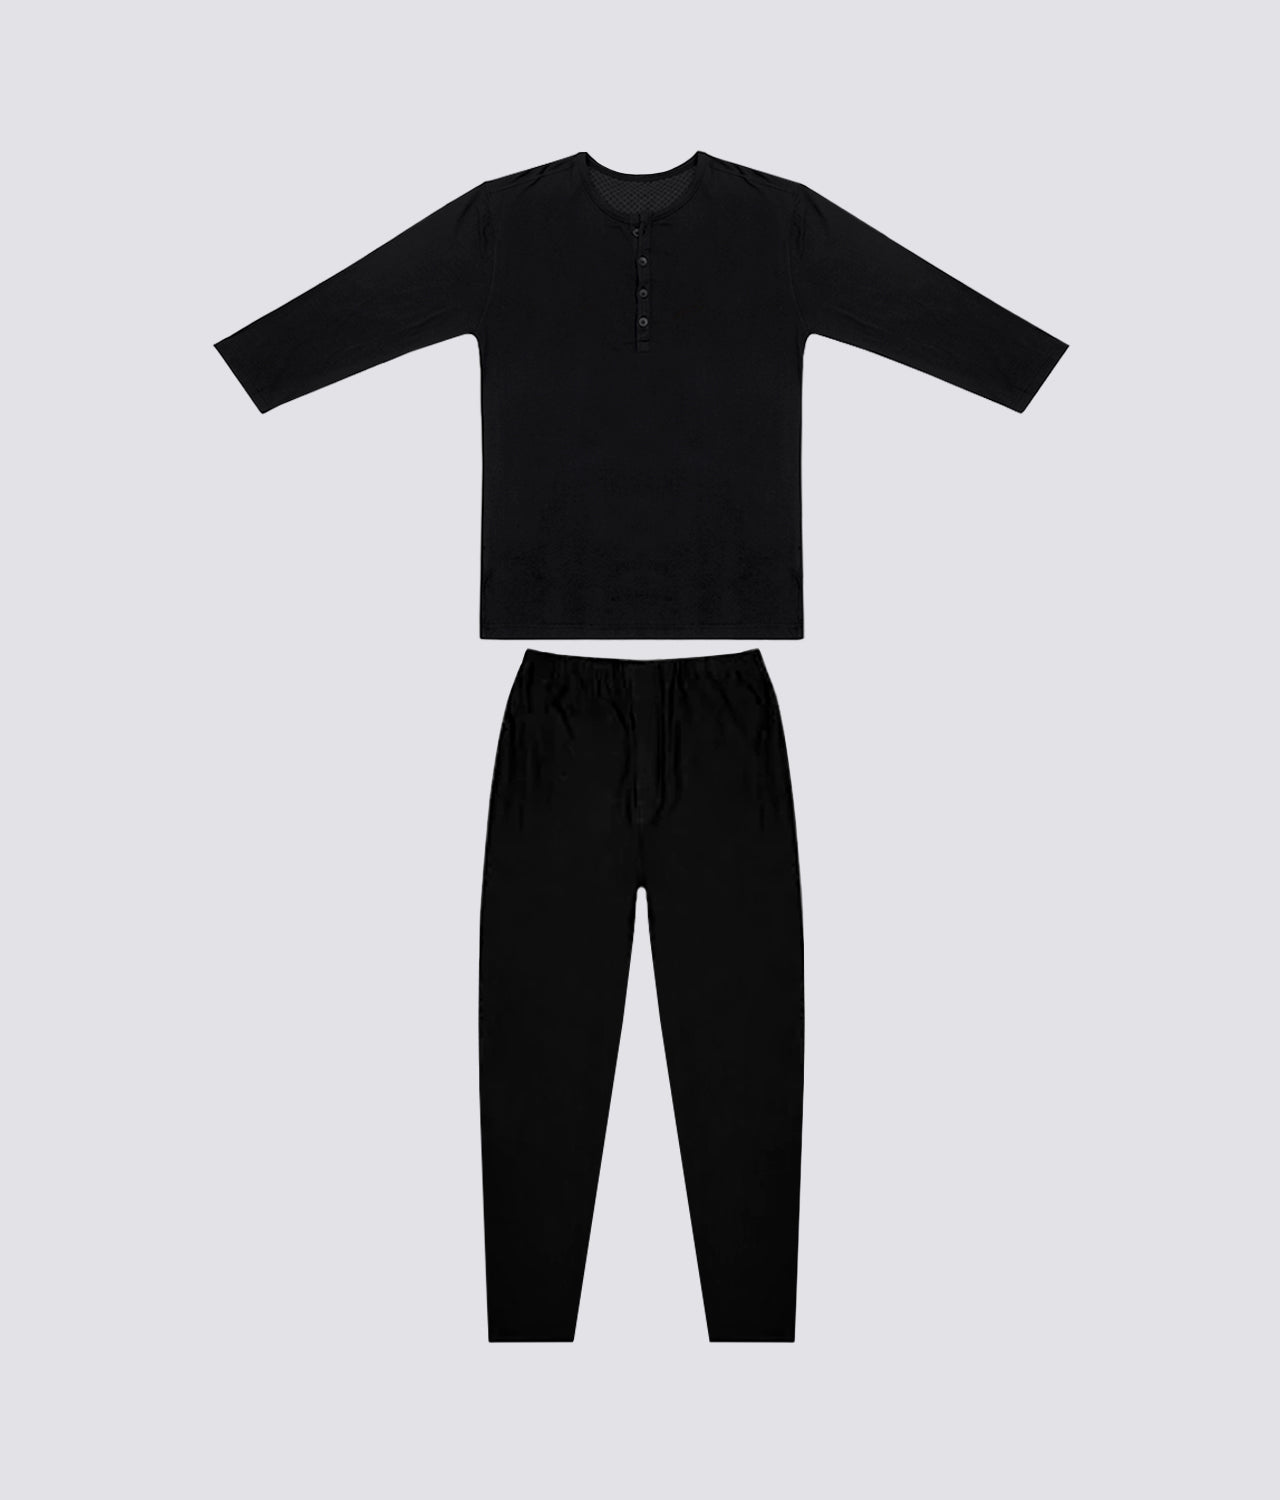 Elite Sports Adults' Black Athletic Recovery Wear